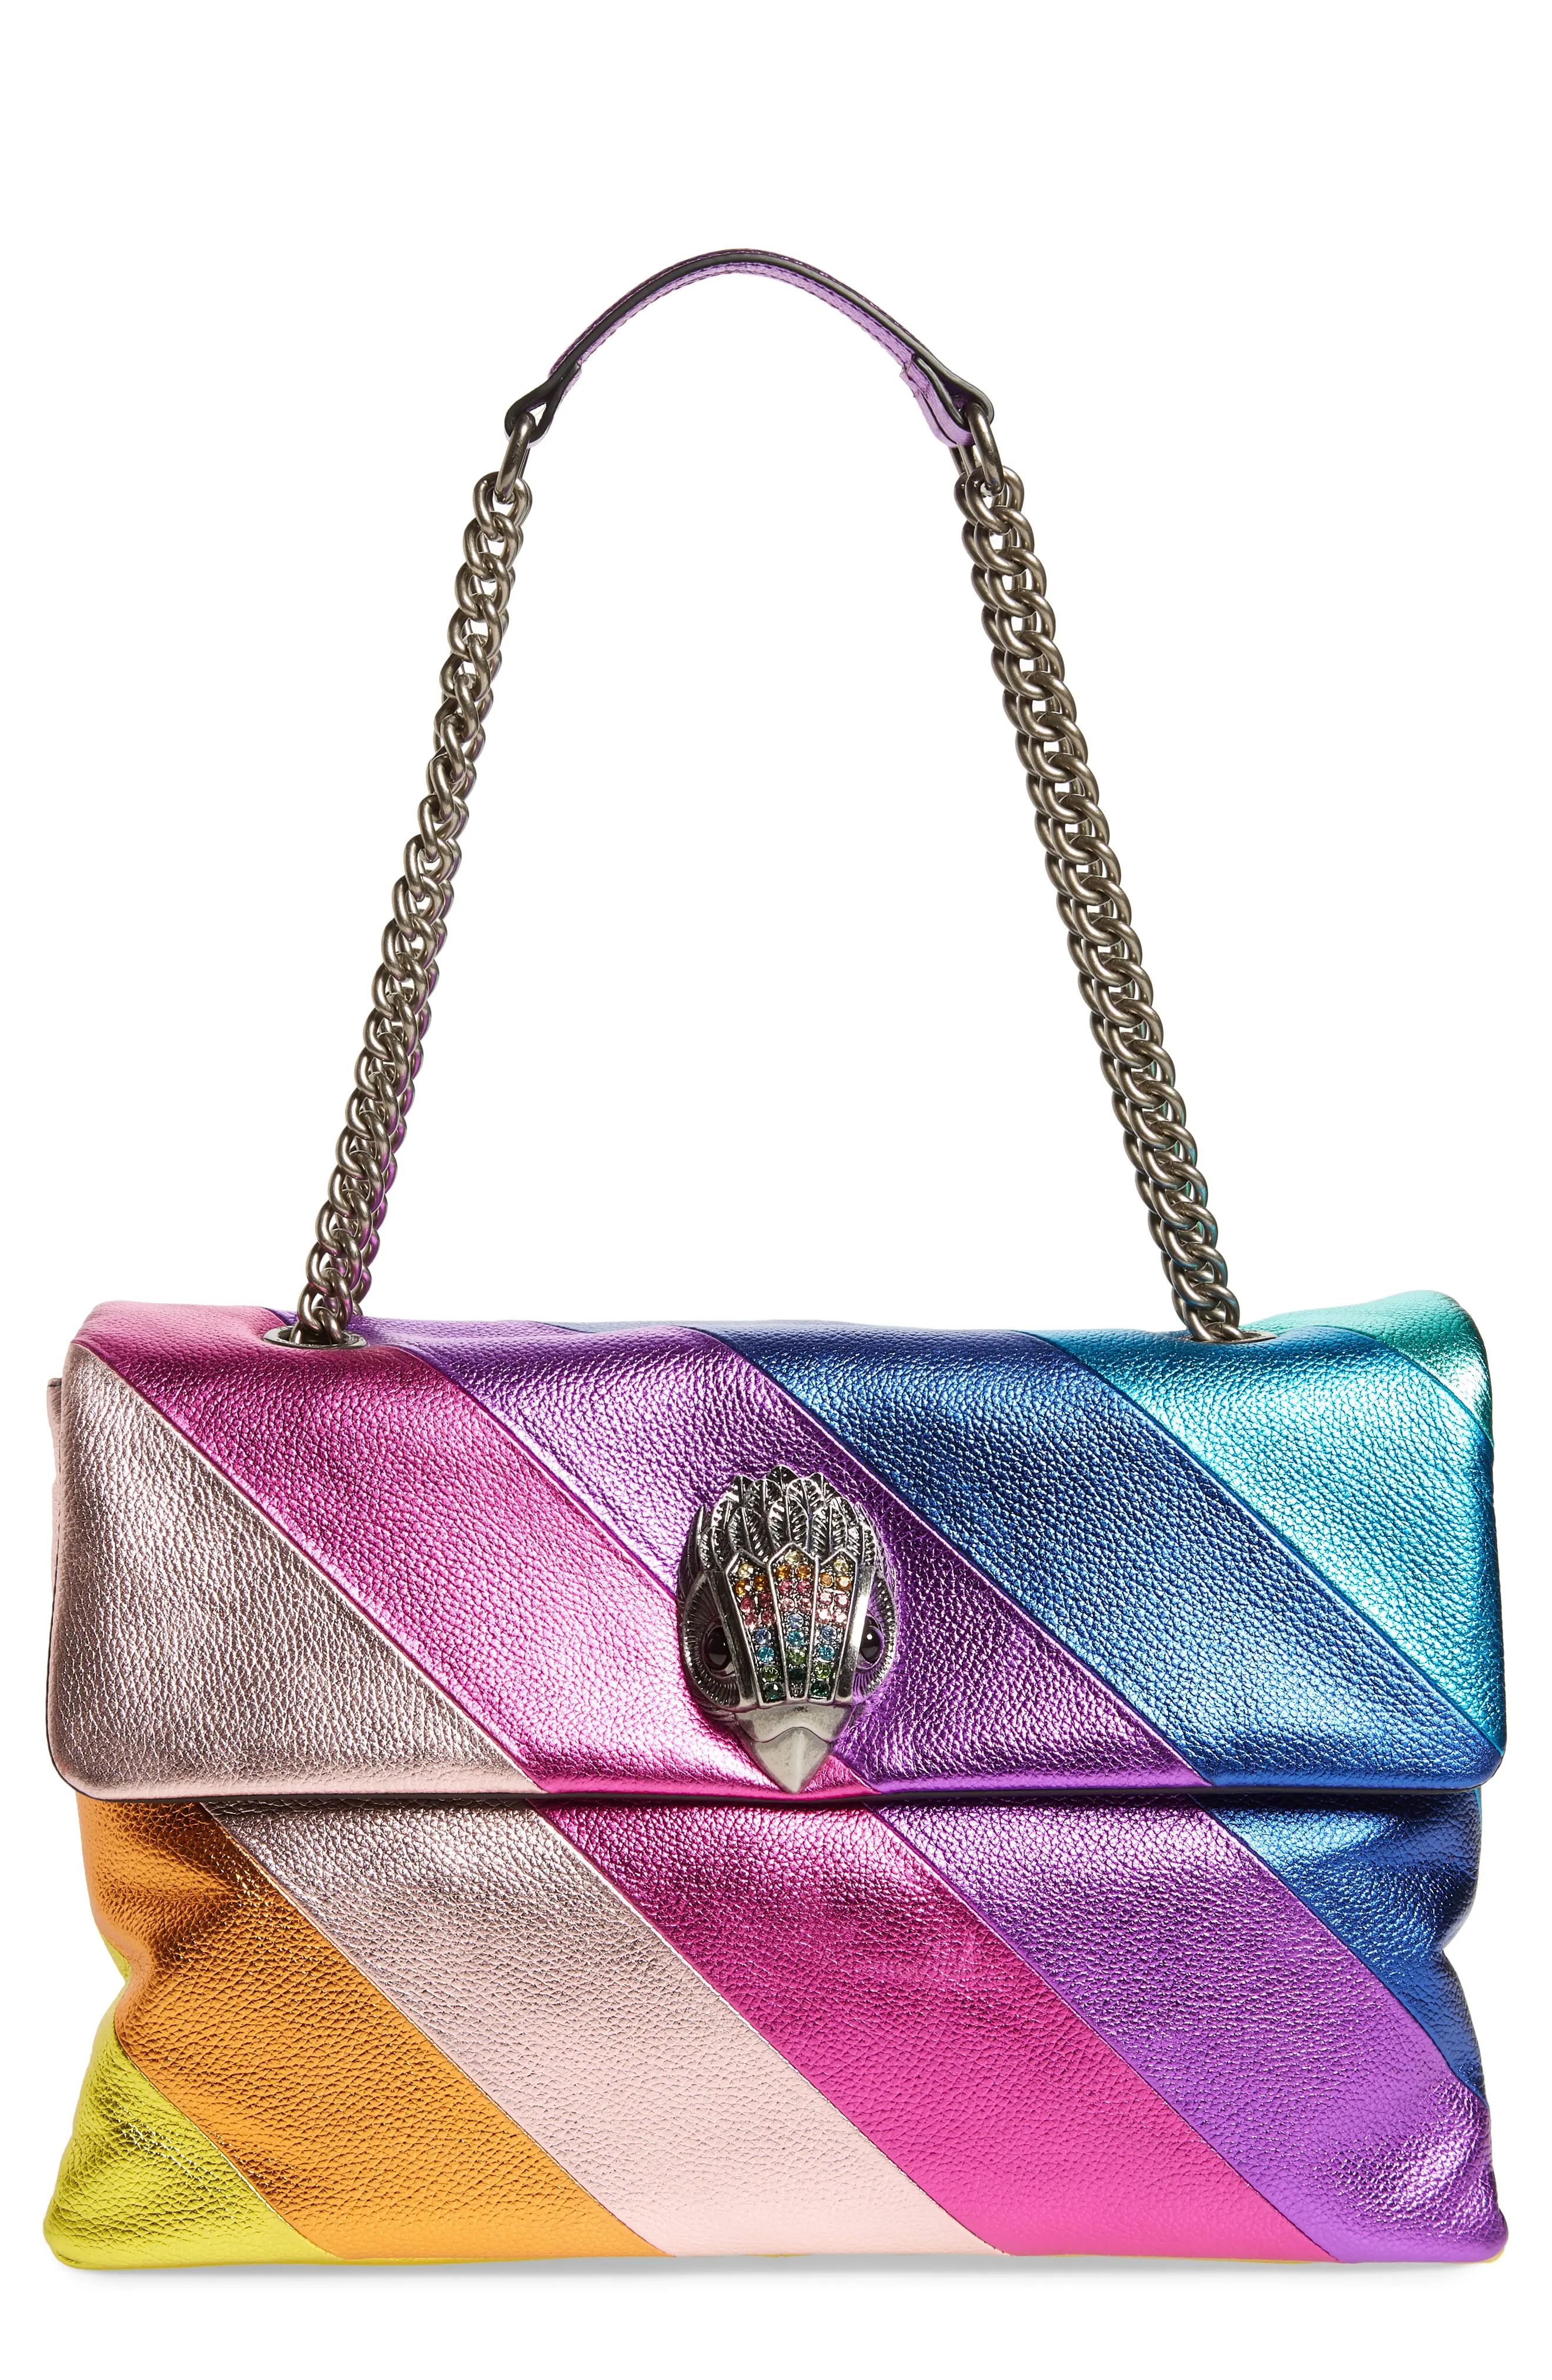 Kurt Geiger London Rainbow Shop Extra Extra Large Kensington Quilted Leather Shoulder Bag in Multi a | Nordstrom